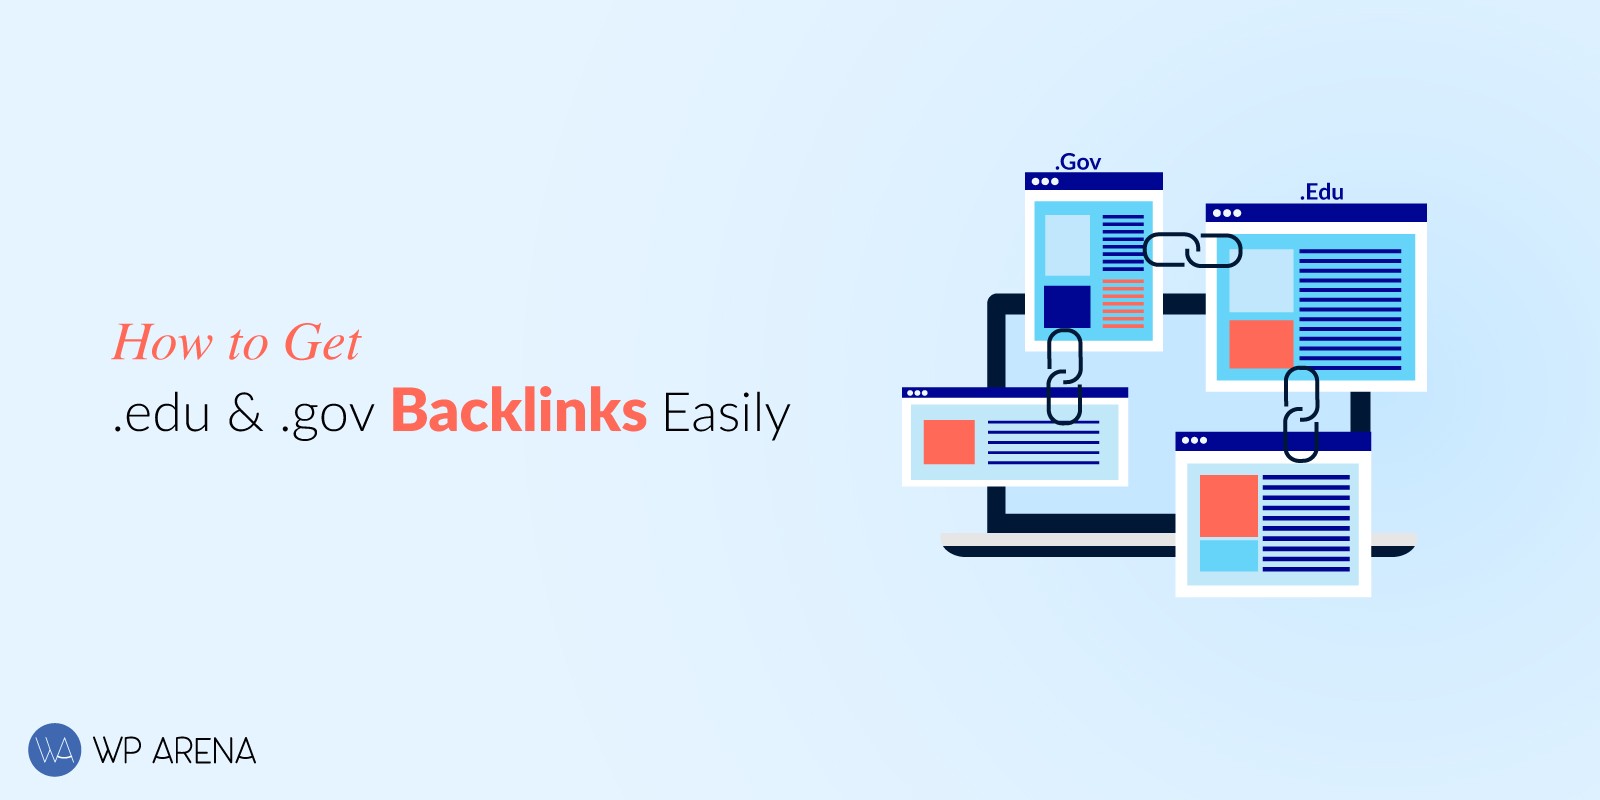 How To Get .Edu and .Gov Backlinks Easily and Resources